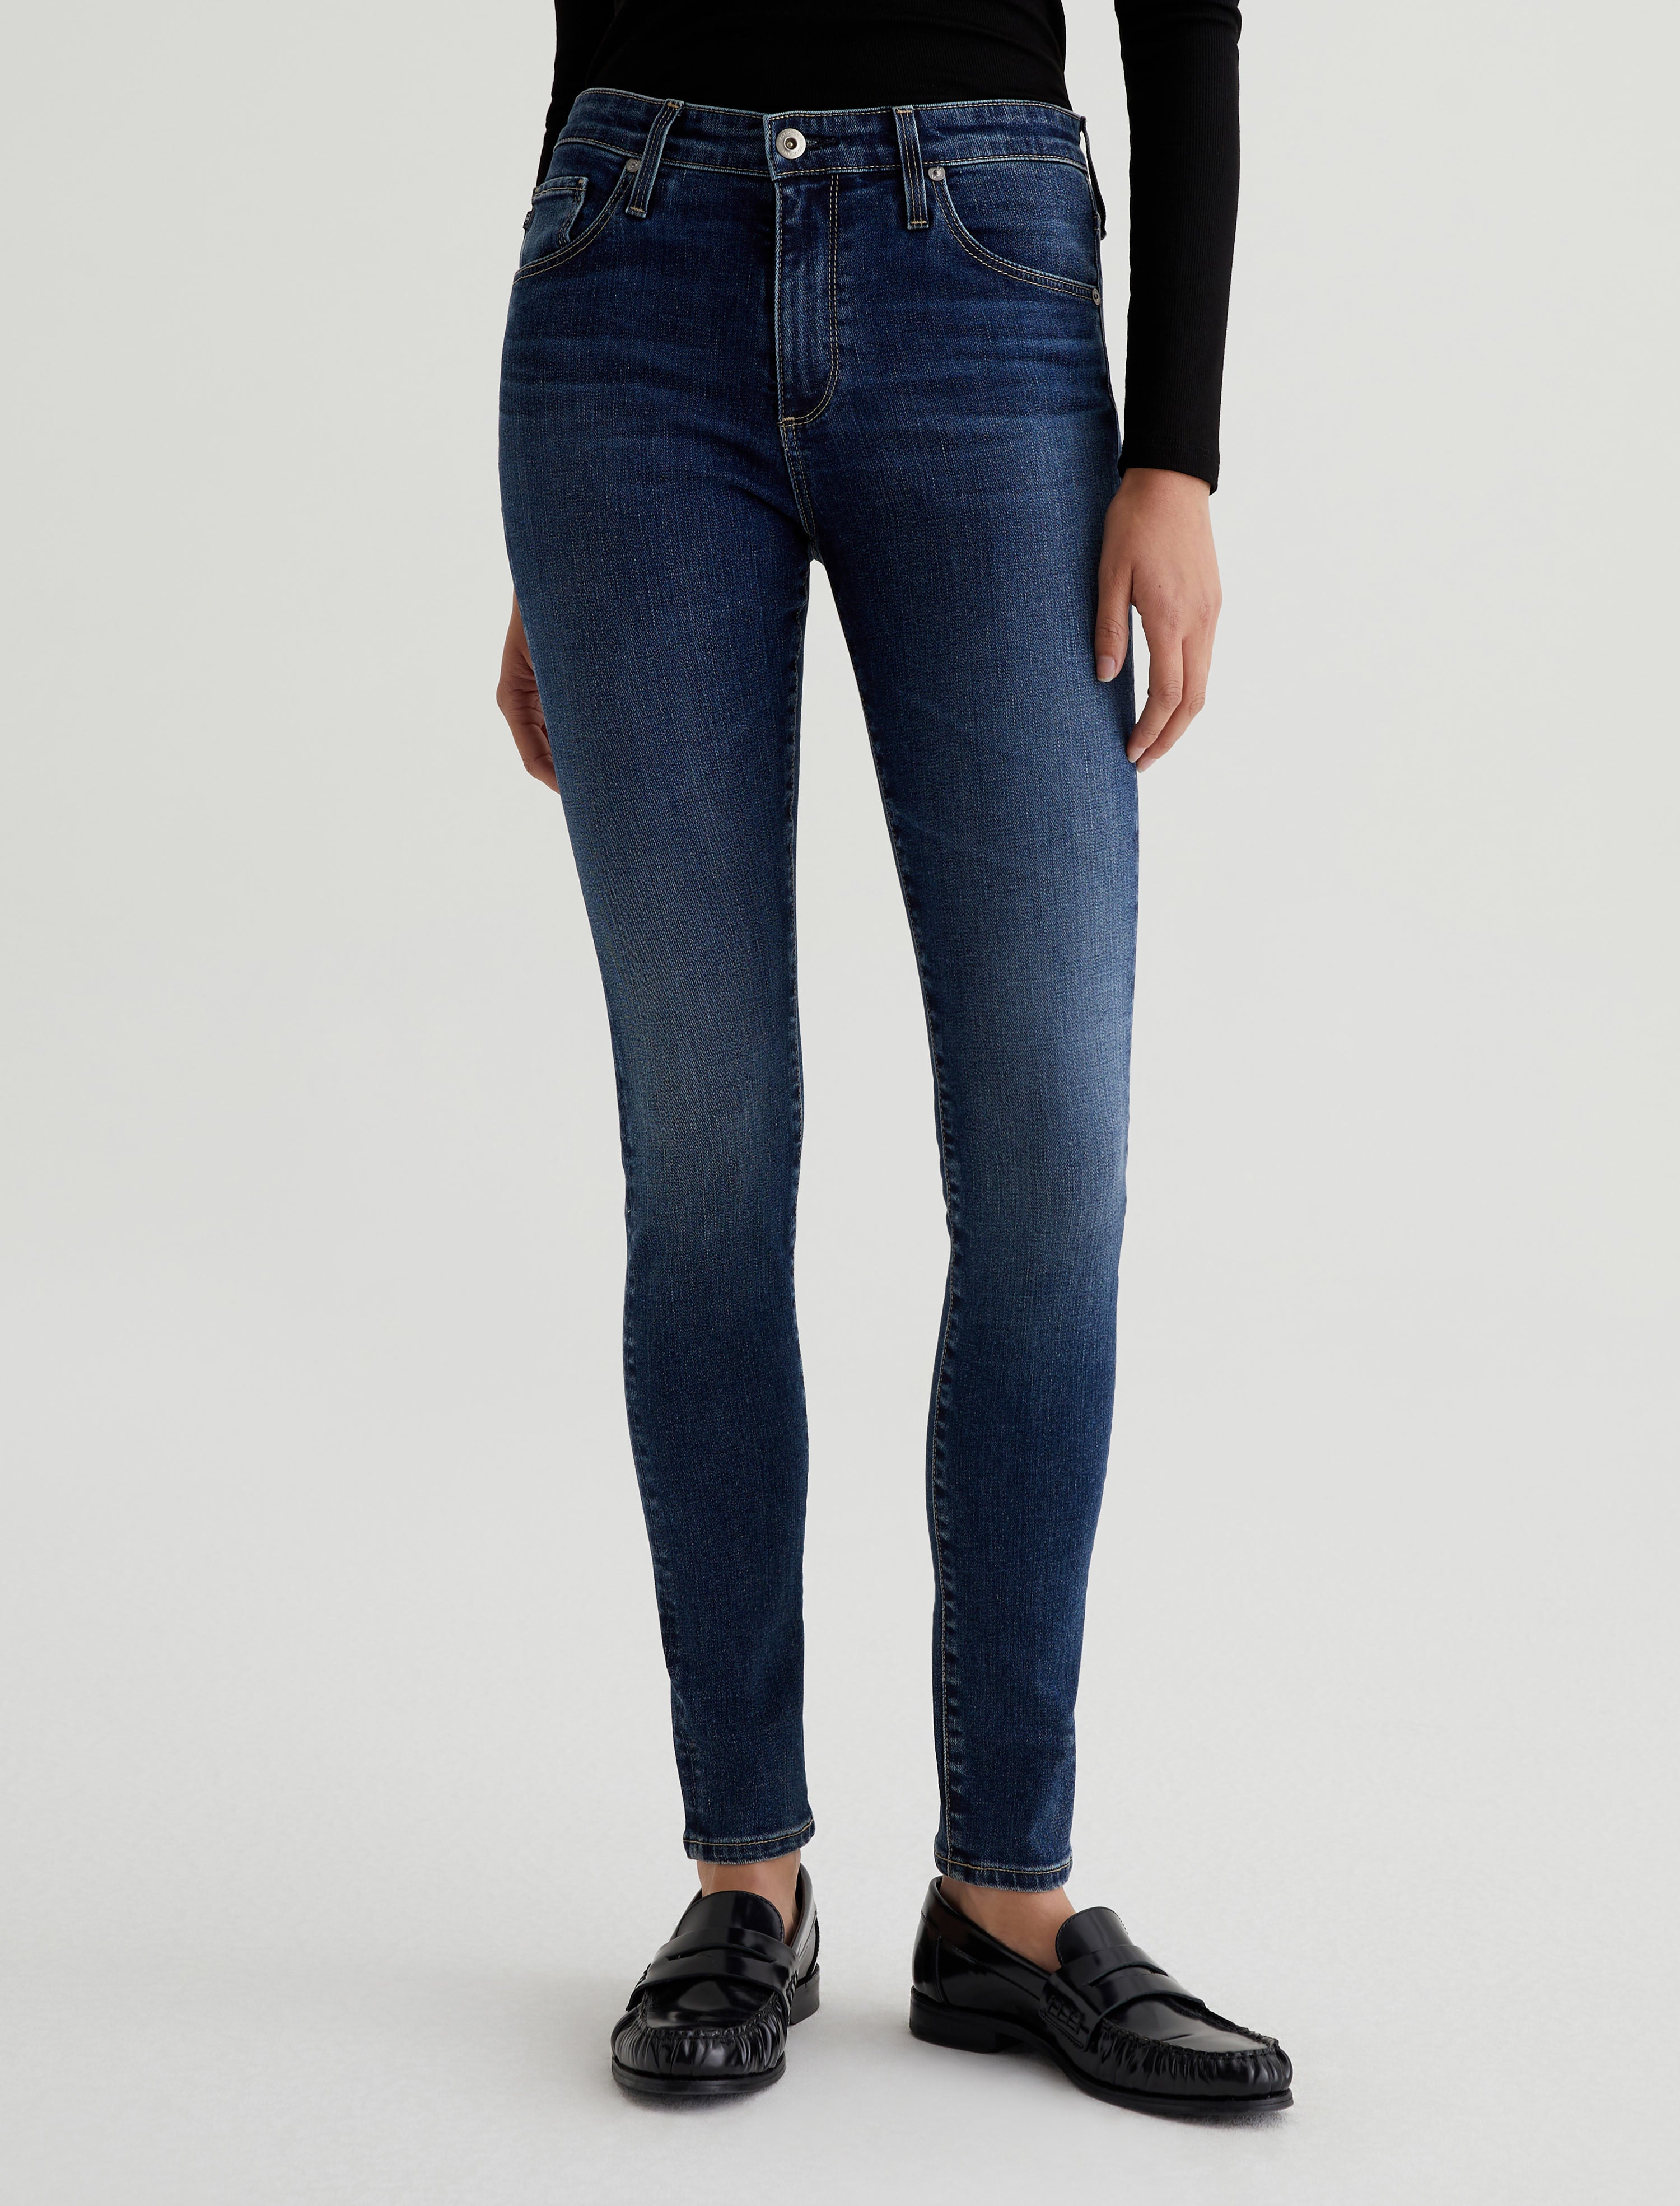 Womens Farrah Skinny Ankle Park Slope at AG Jeans Official Store